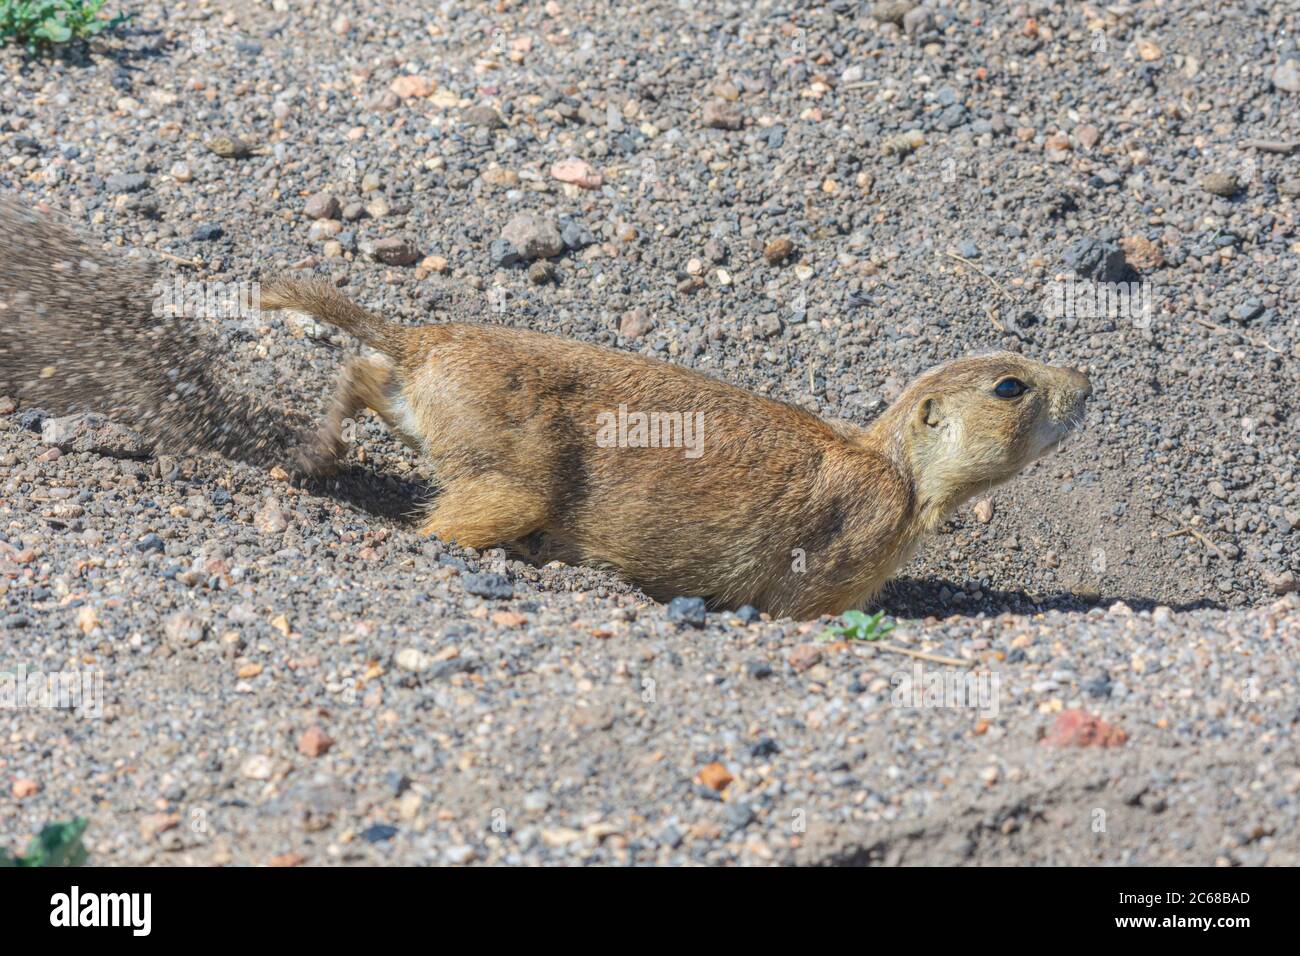 Gunnison's Prairie Dog (Cynomys gunnisoni), shoveling out its burrow with hind legs, Monument Colorado USA. Photo taken in July. Stock Photo